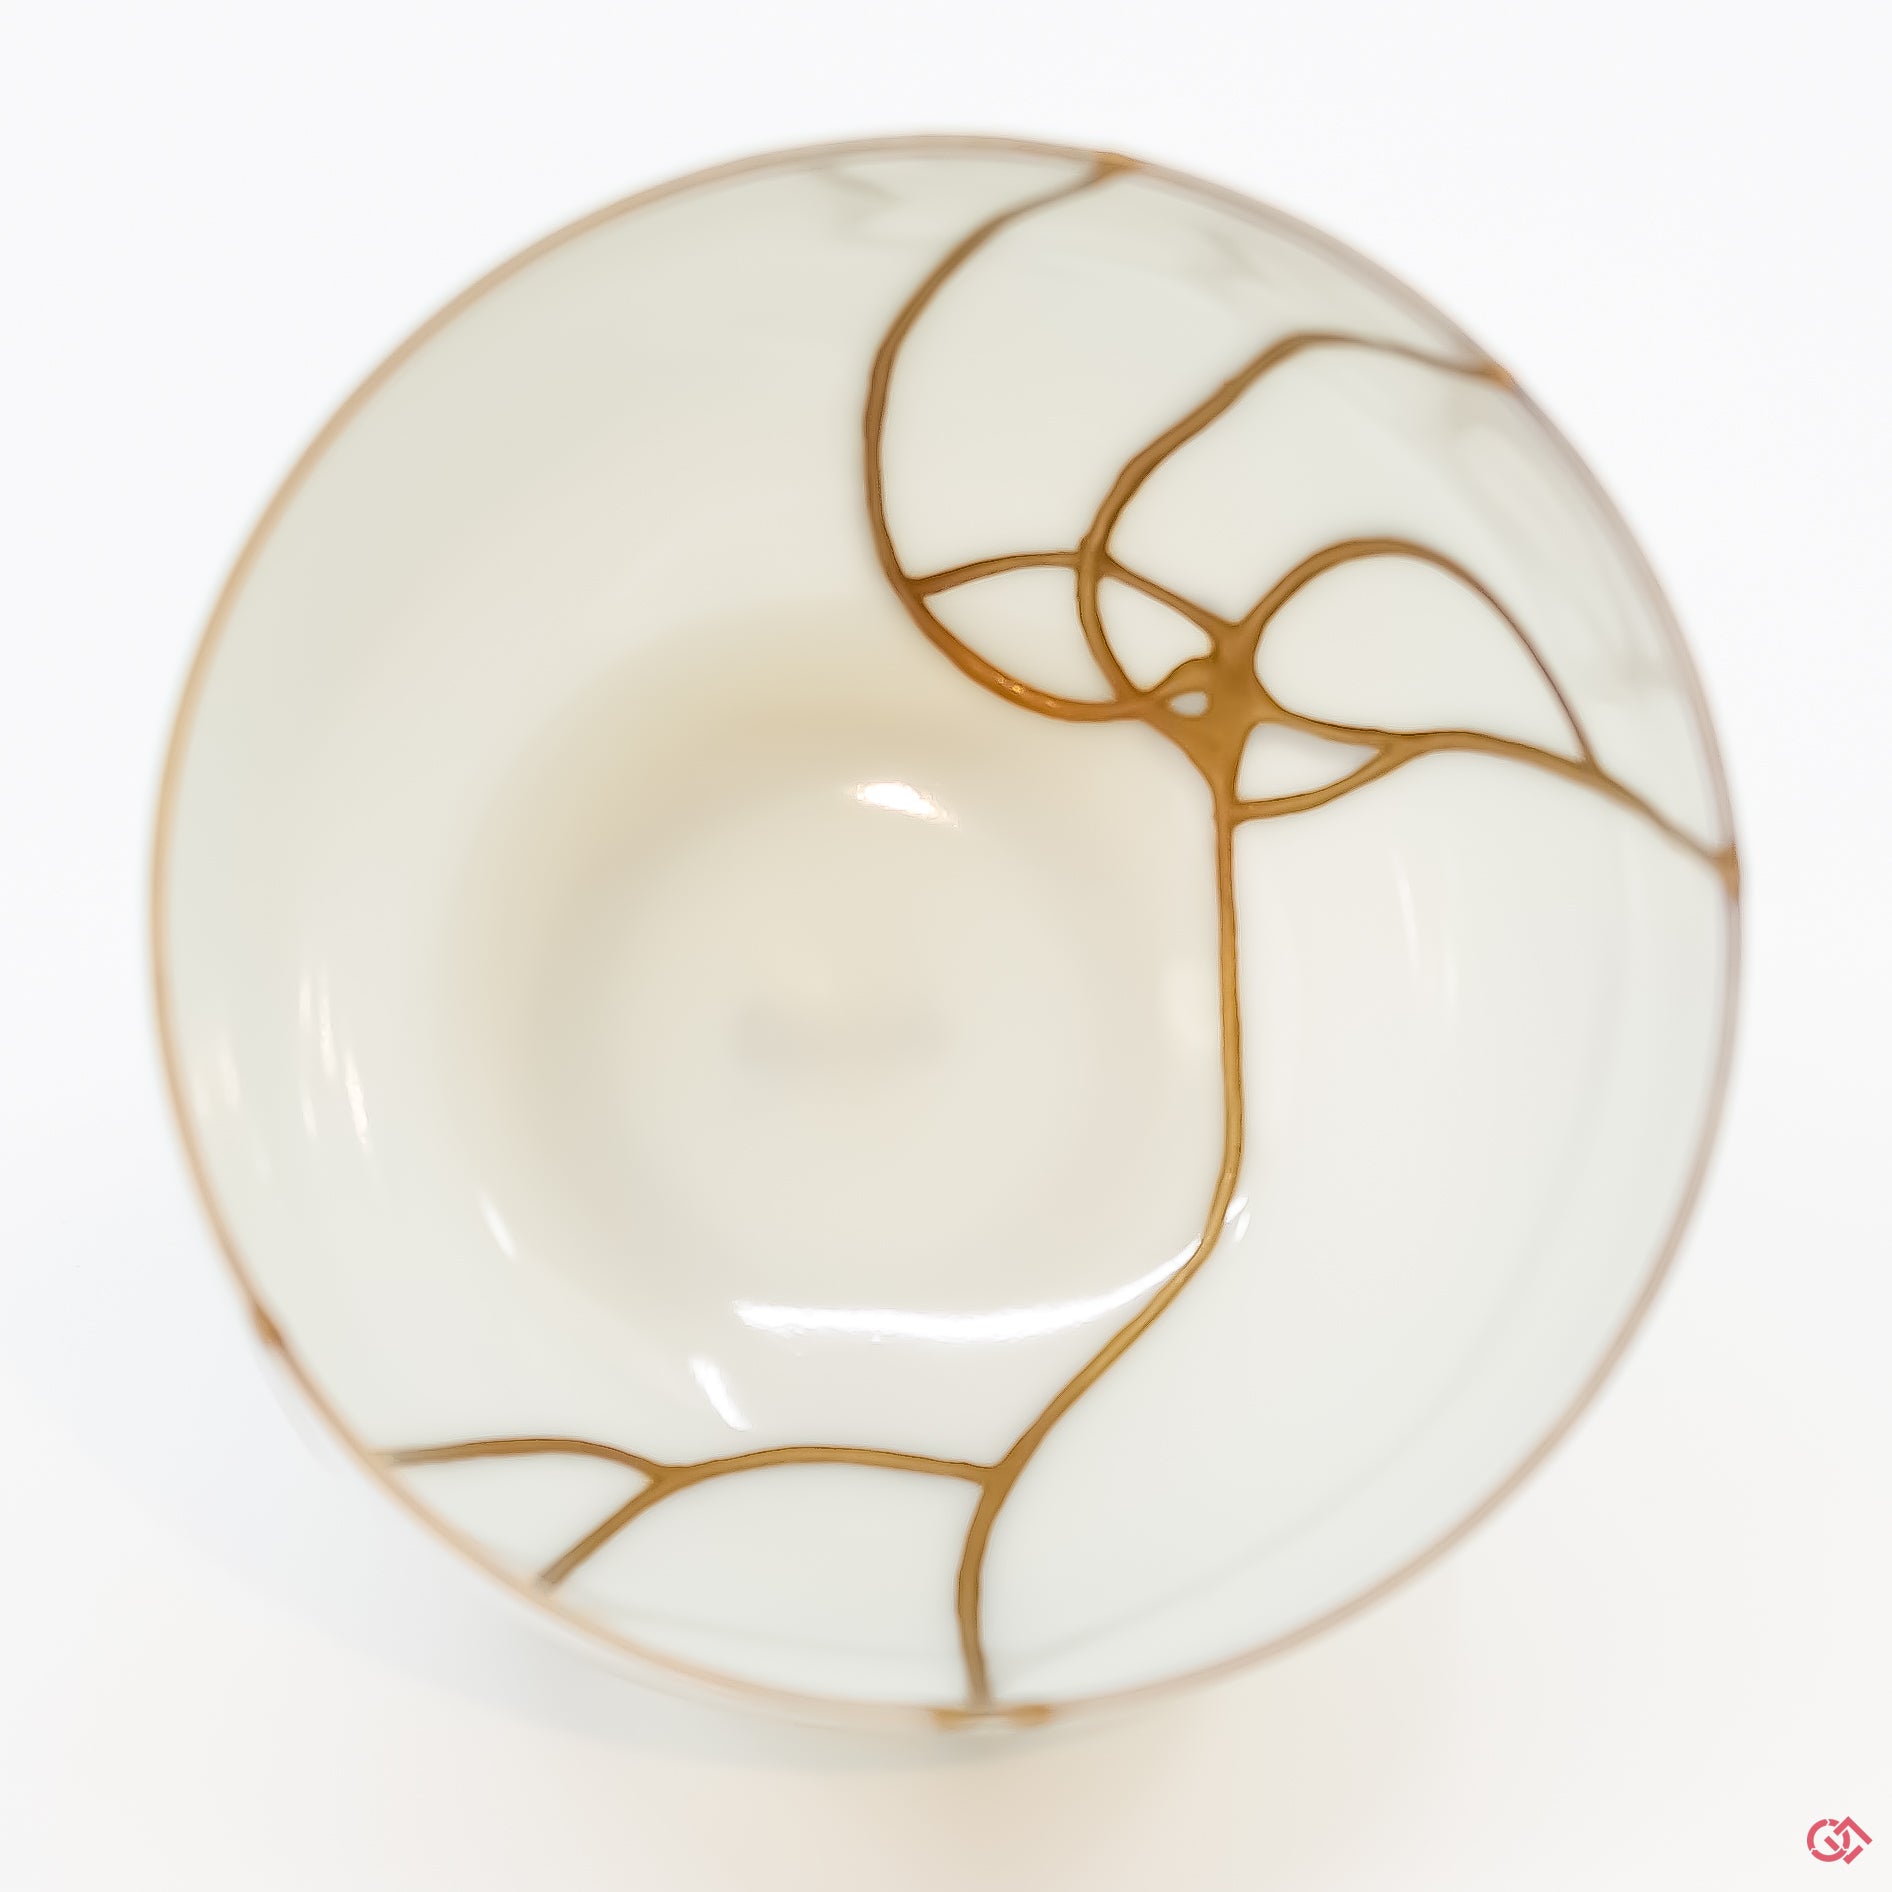 Photo of the front side of an authentic Kintsugi pottery, showing its overall design and features